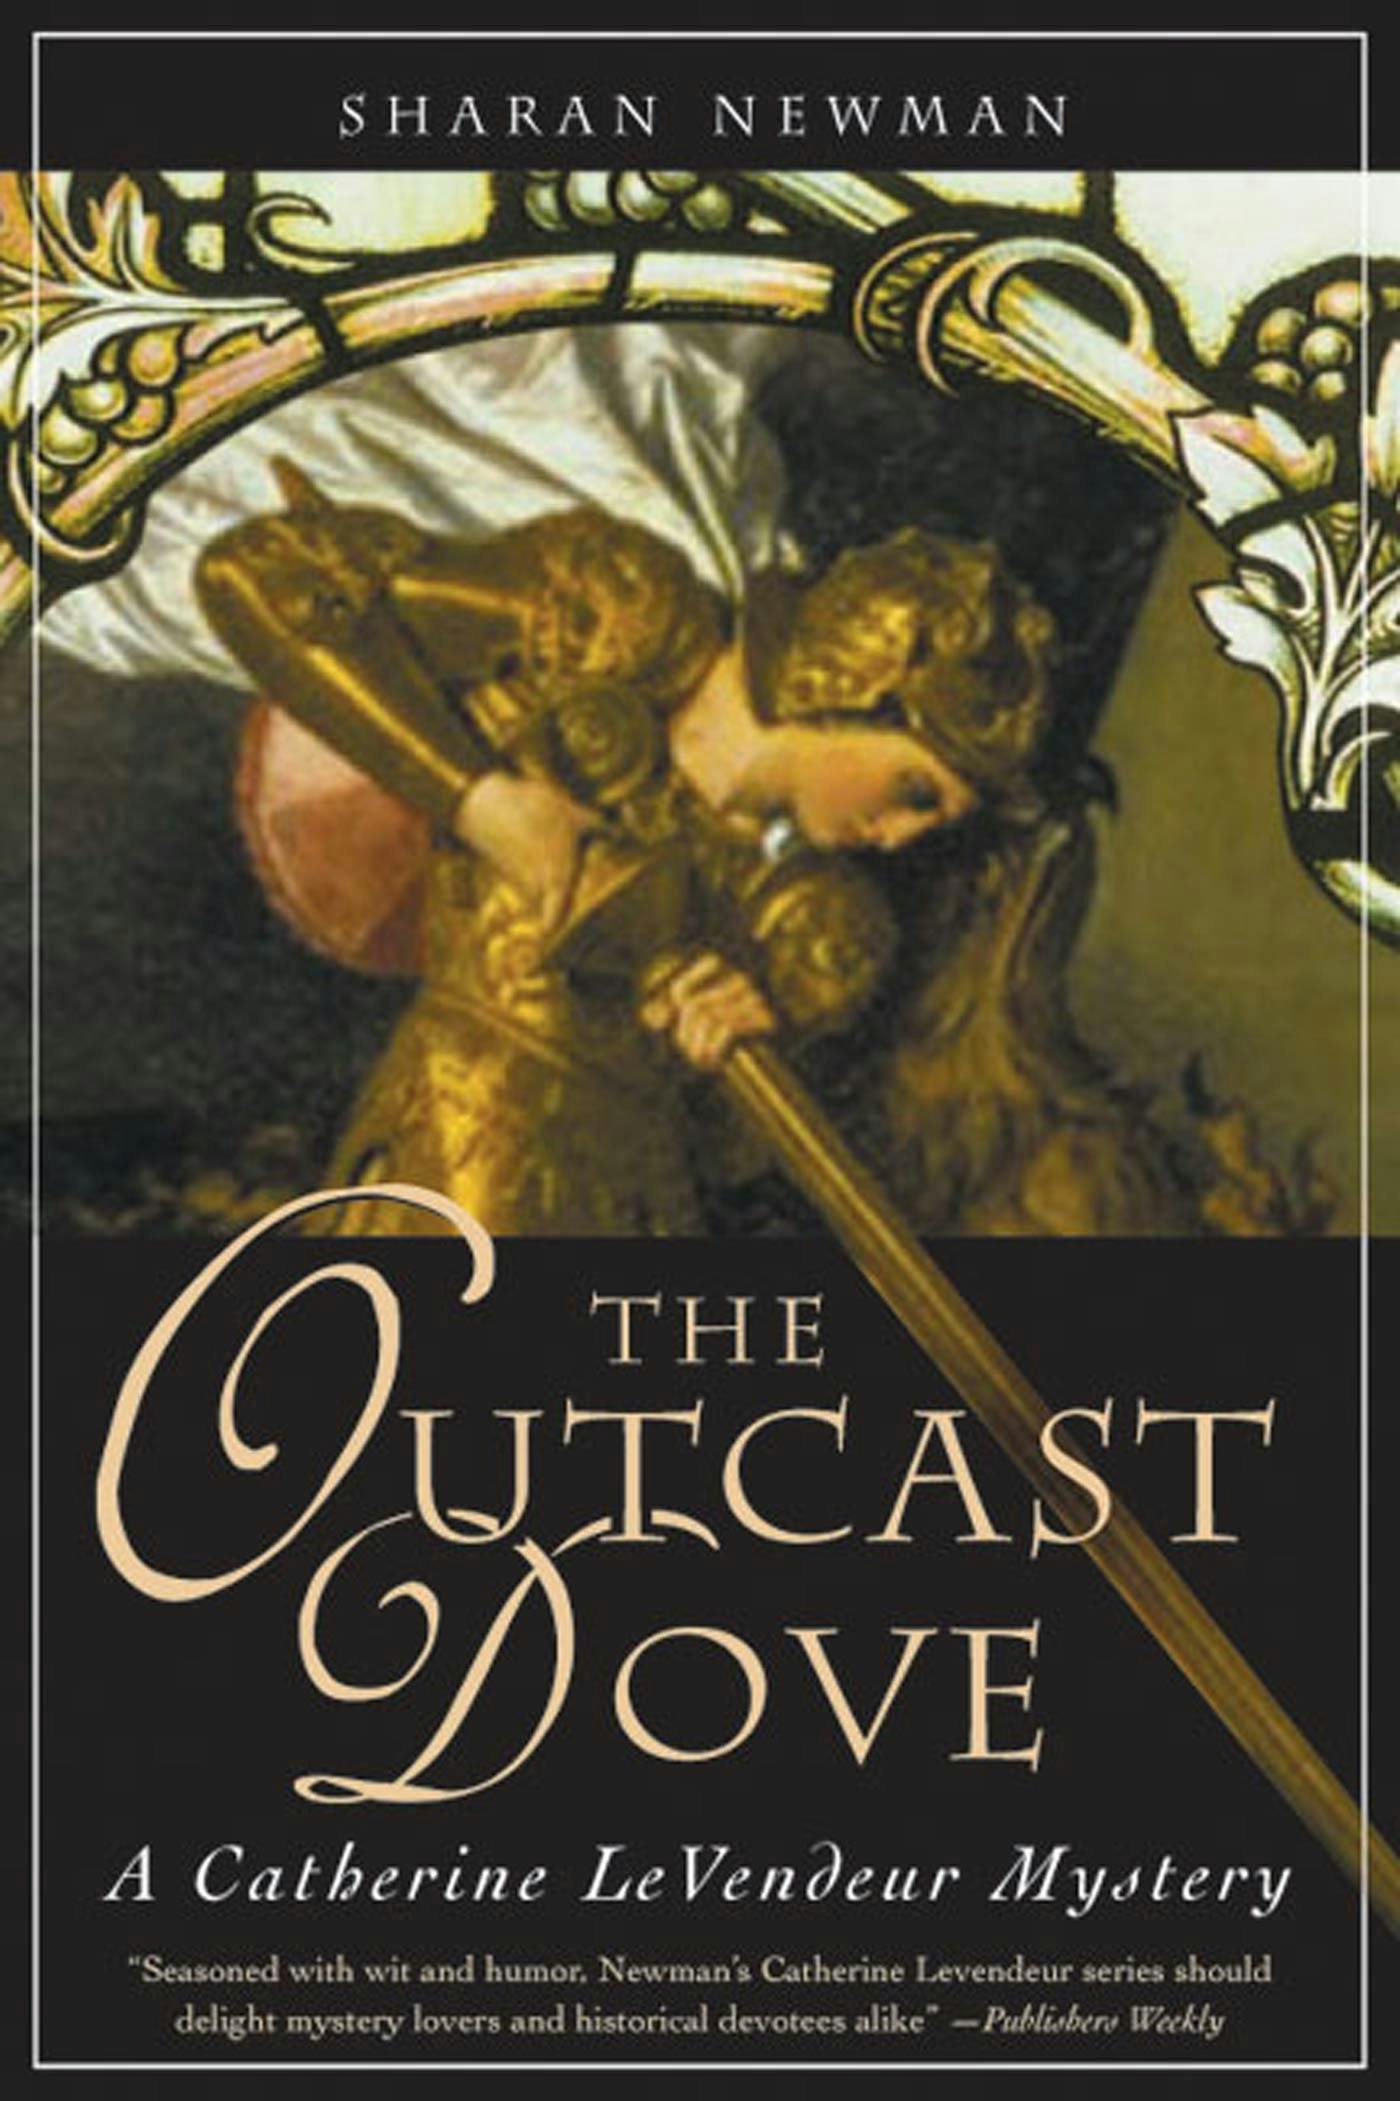 Cover for the book titled as: The Outcast Dove